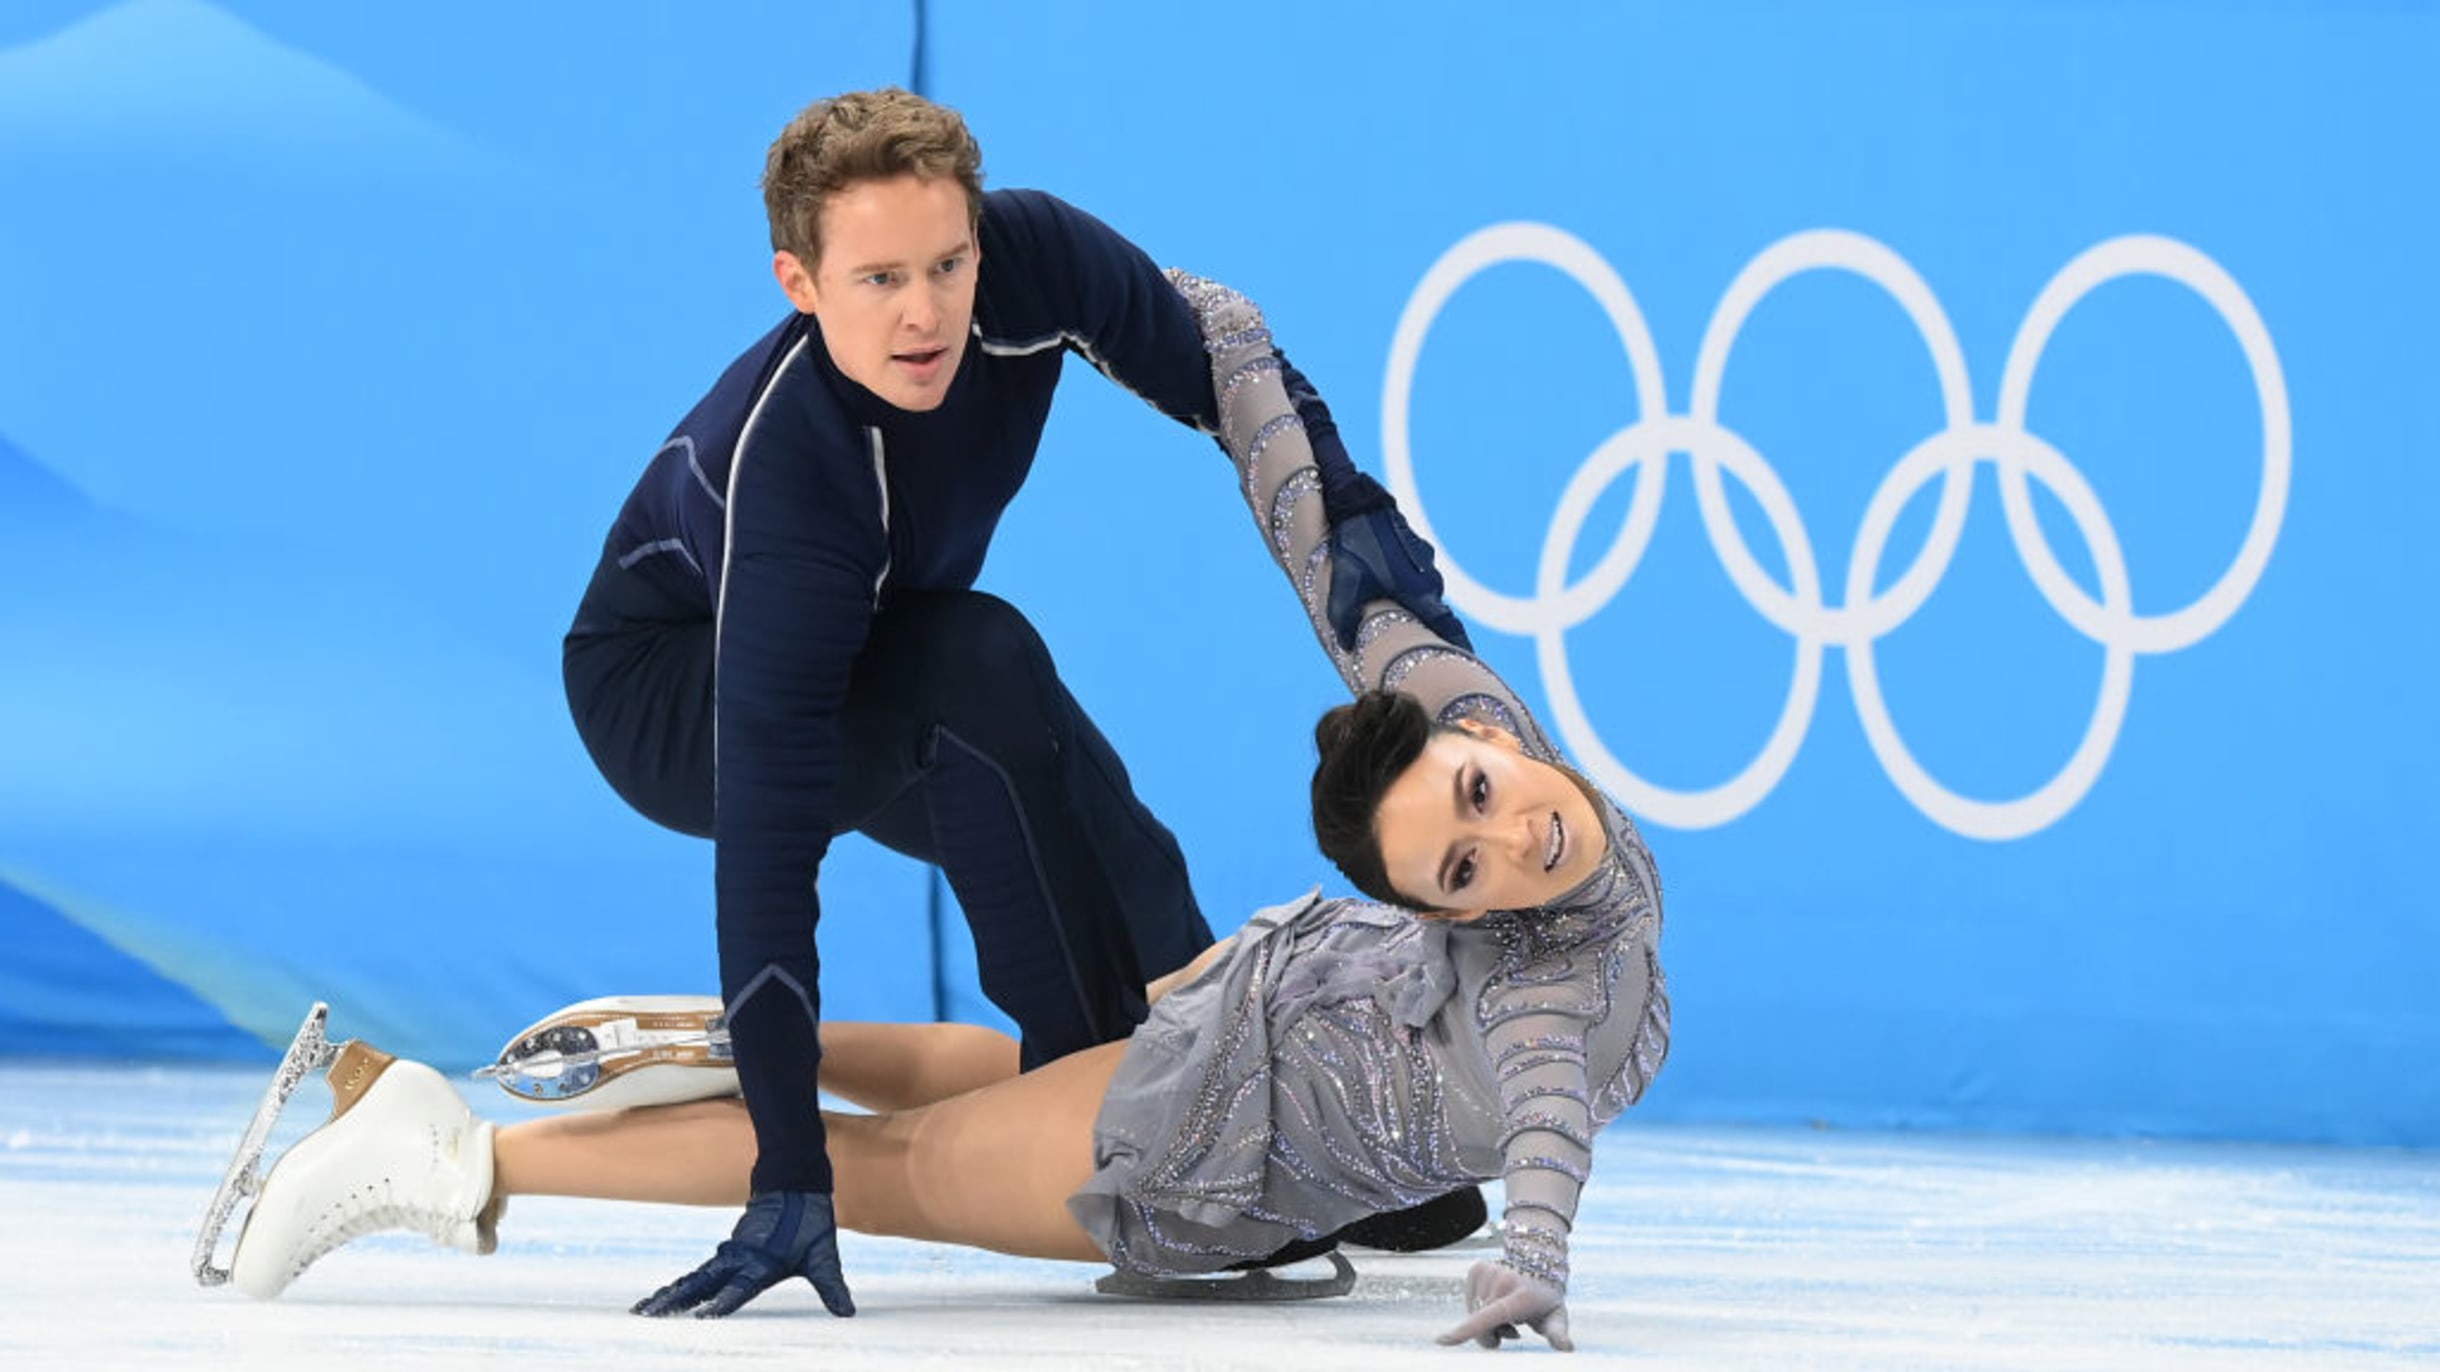 watch the olympics figure skating